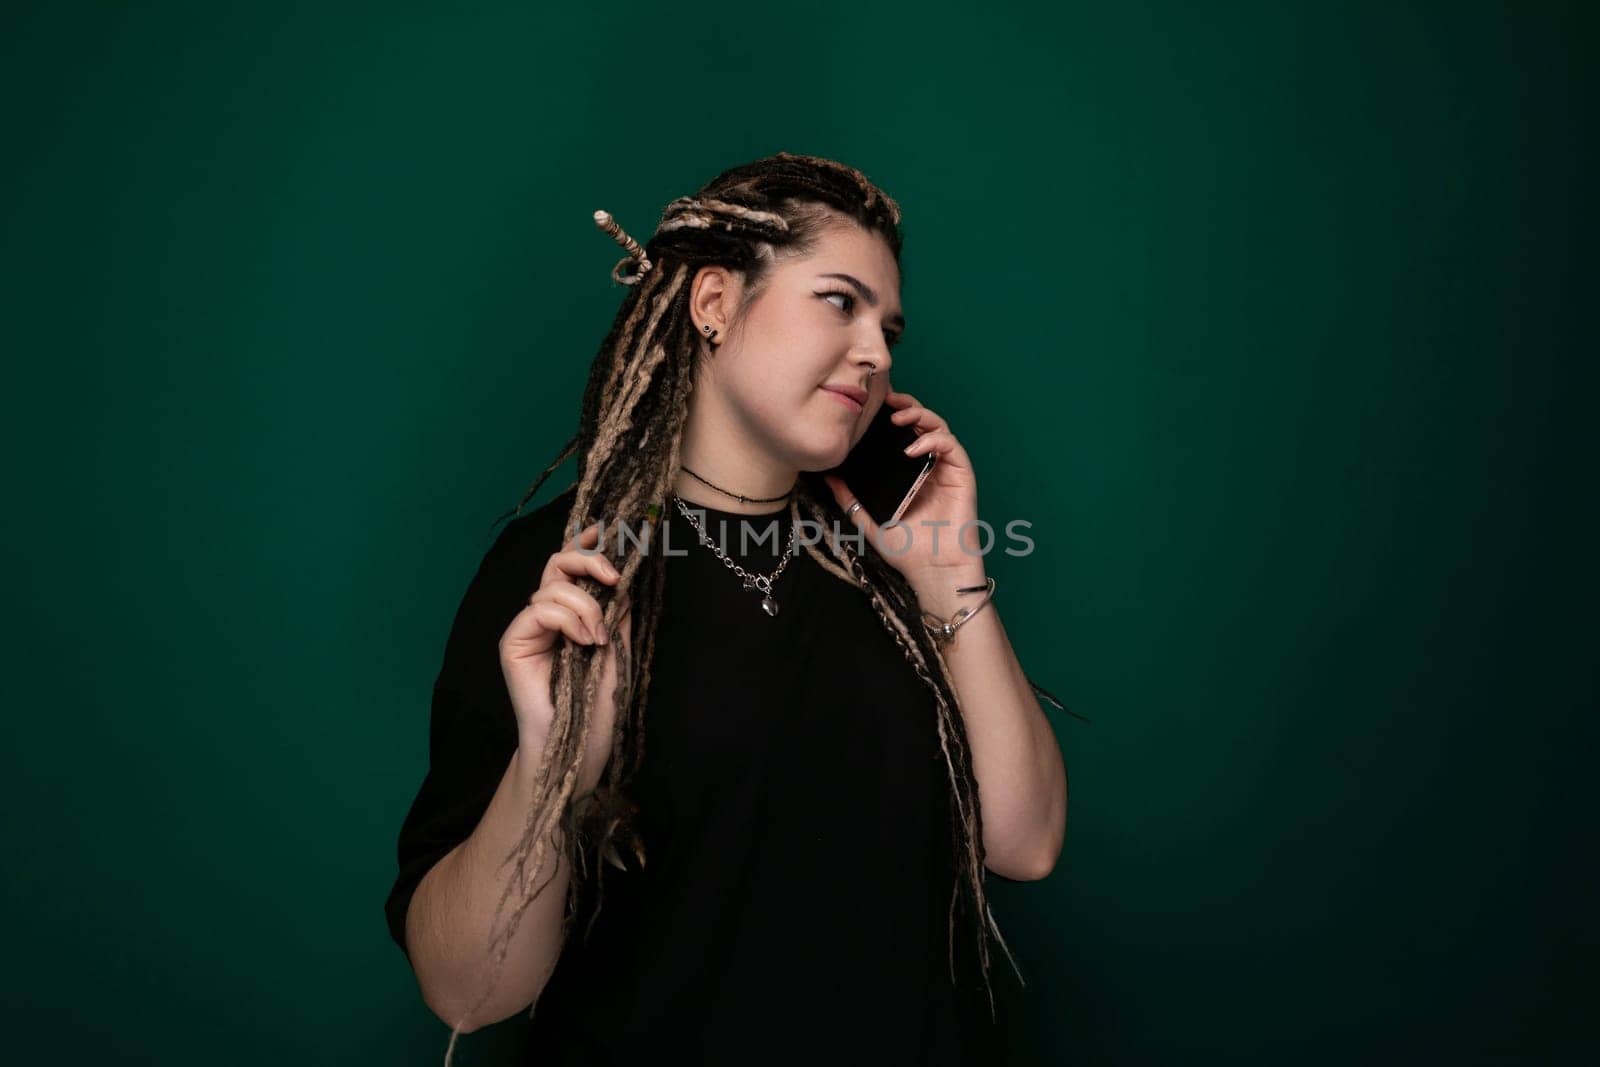 Woman With Dreadlocks Talking on a Cell Phone by TRMK